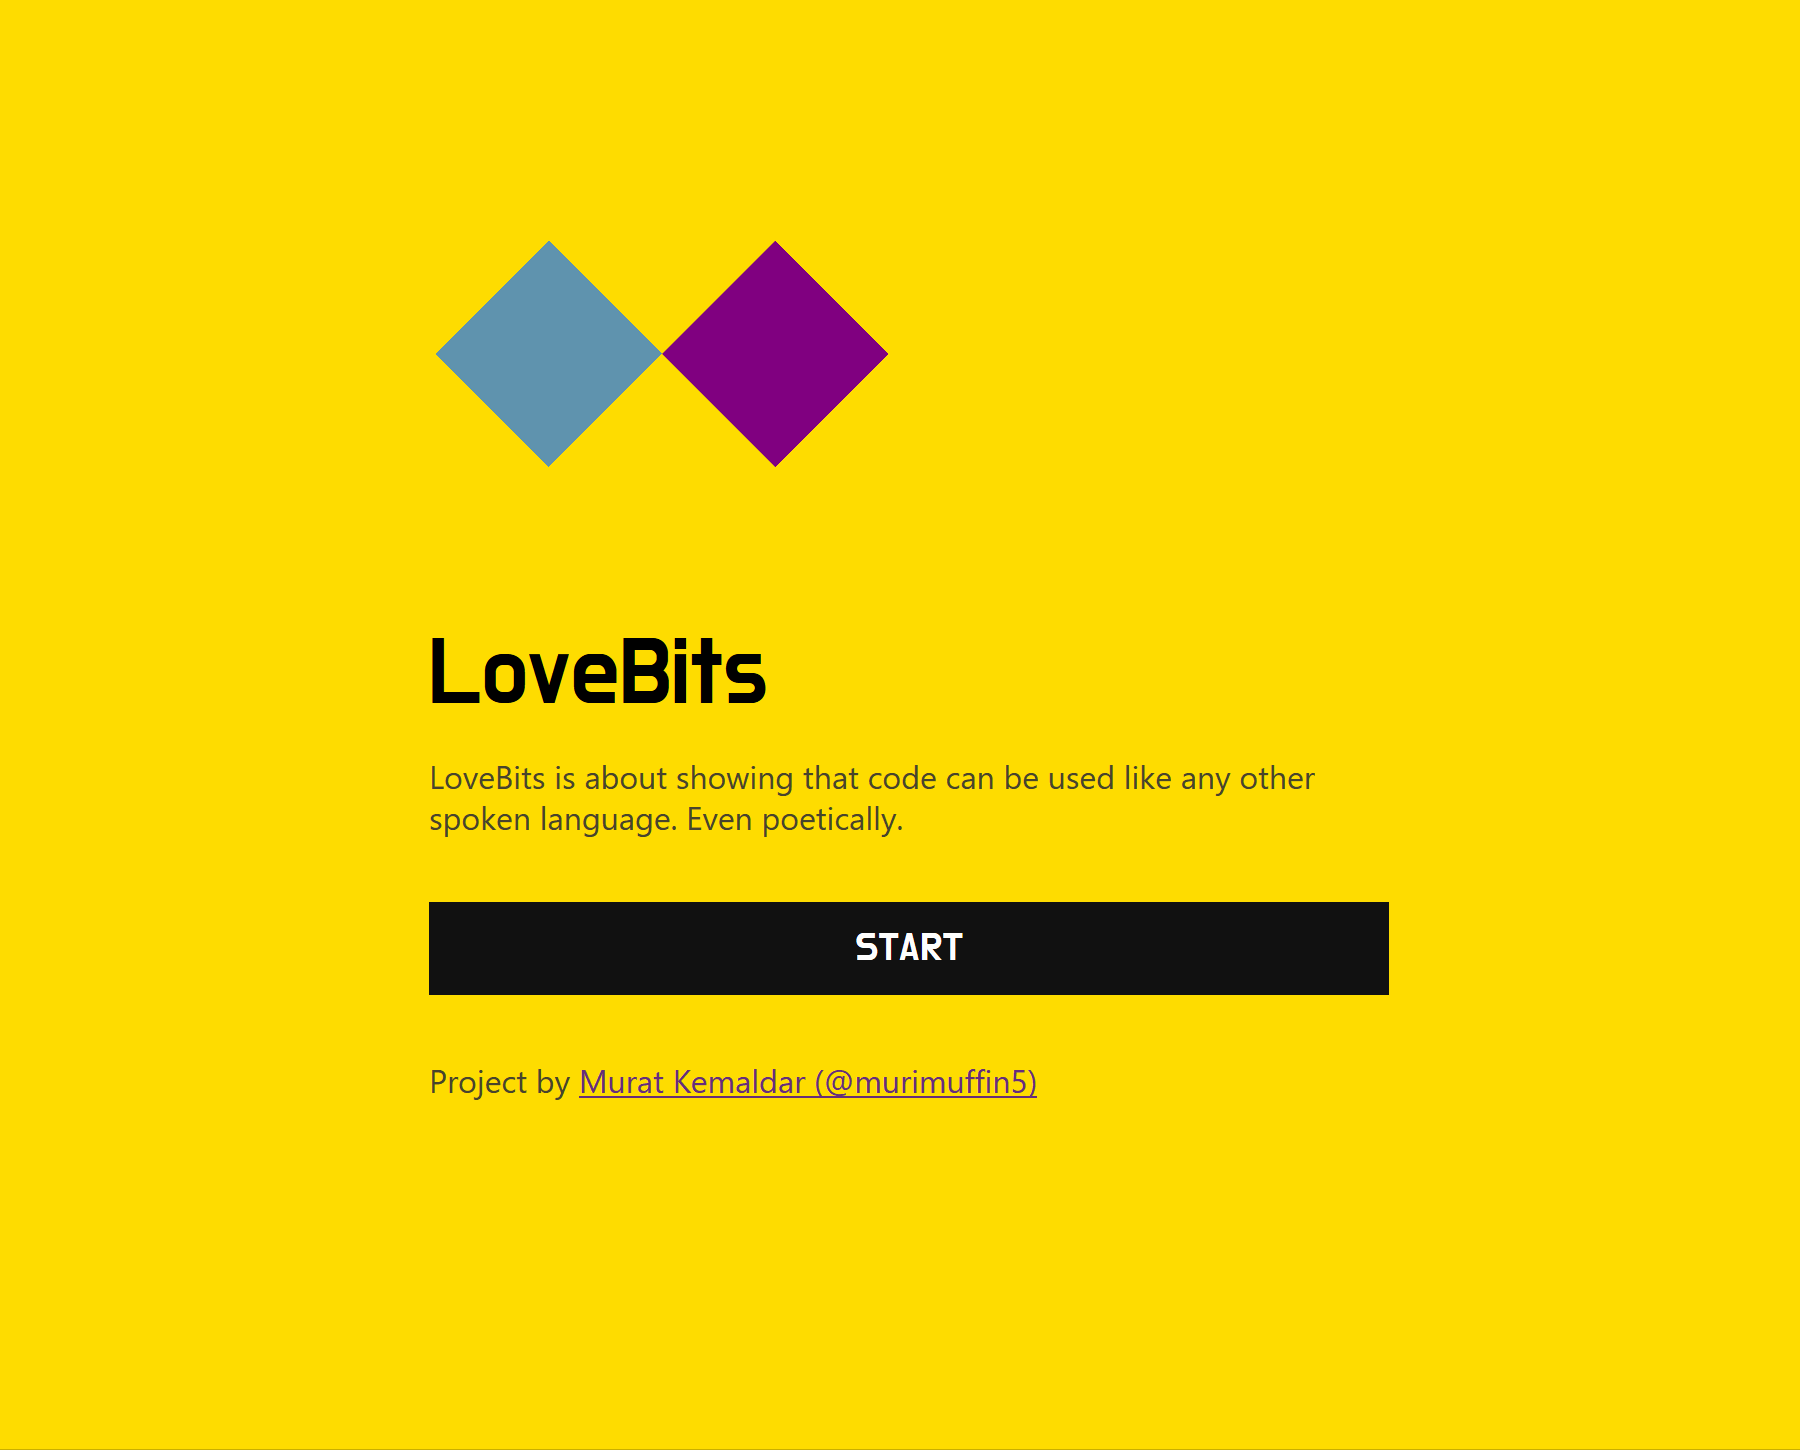 Animated demonstration of the LoveBits project